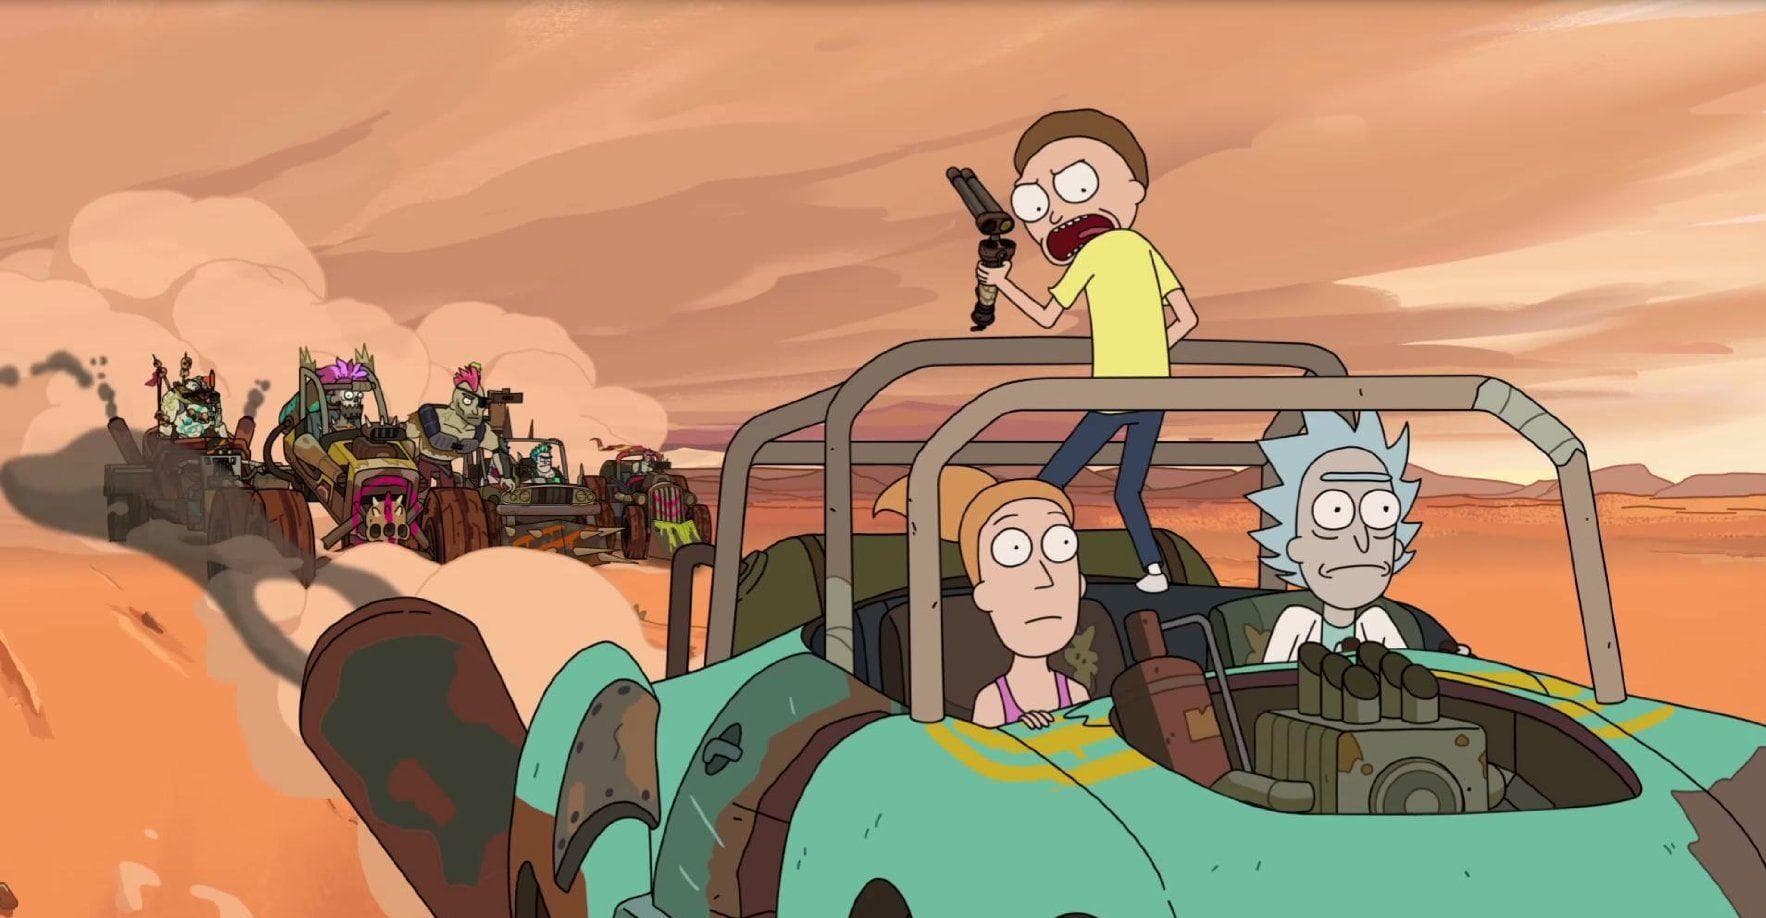 15 Shows Like Rick and Morty To Hold You Over Until It's Back